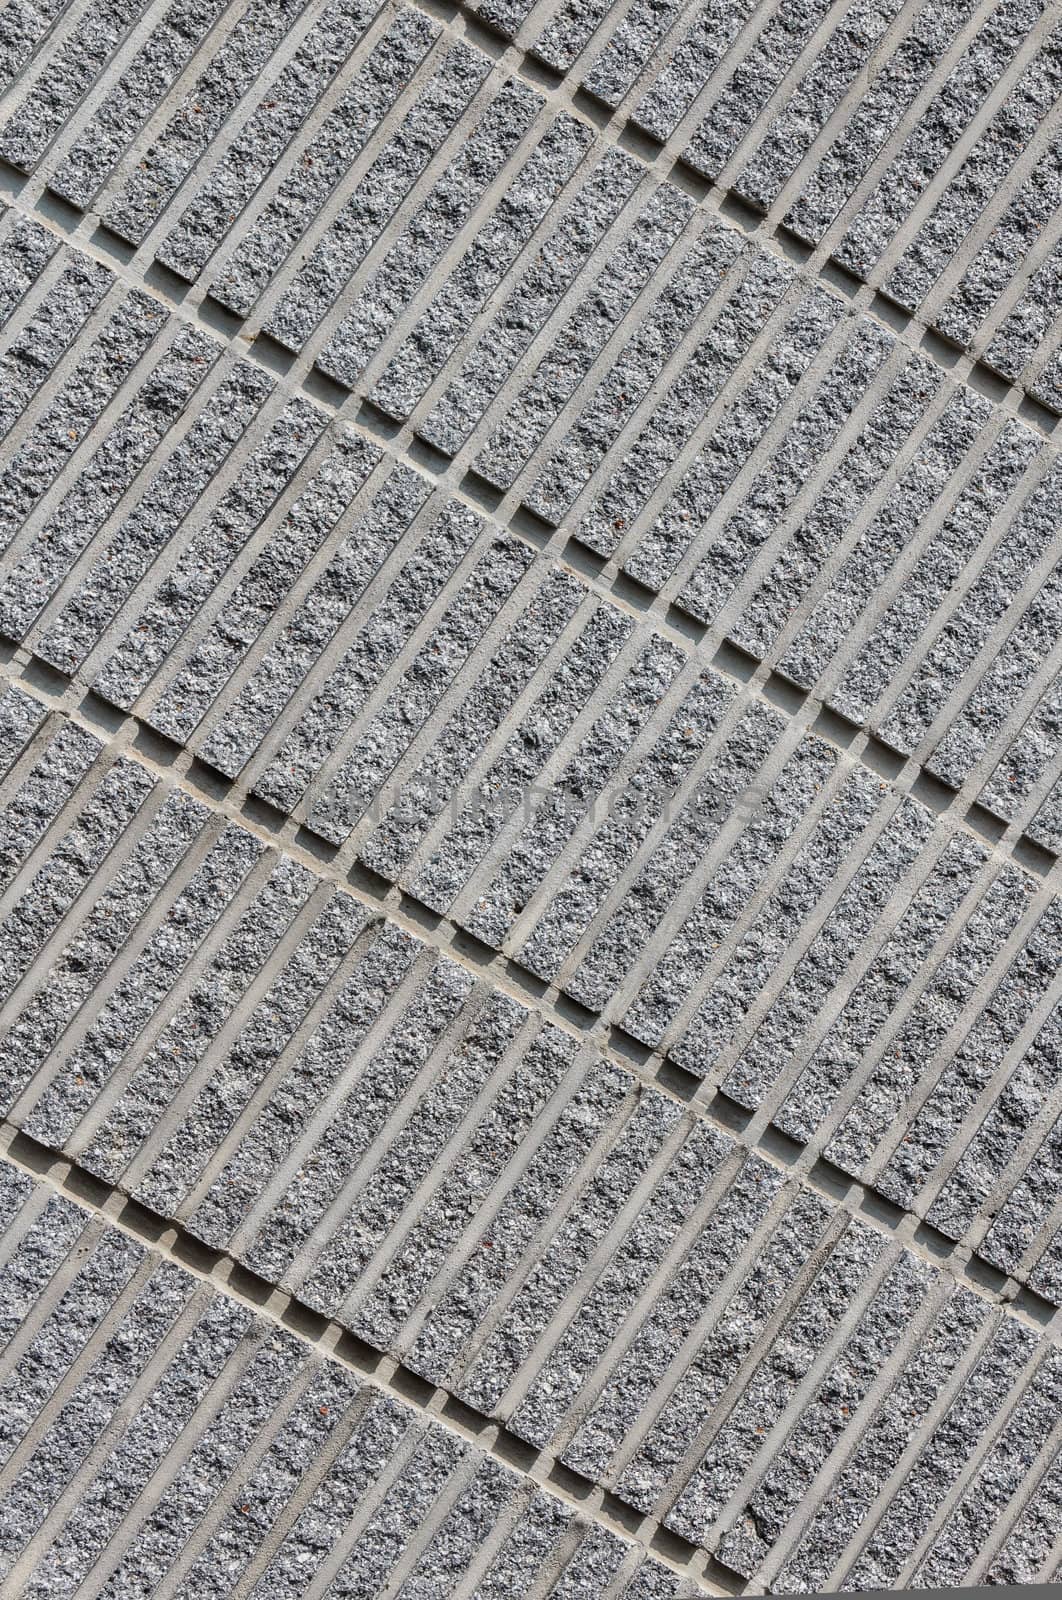 Corrugated Concrete Background showing Pattern of Diagonal Lines by punpleng